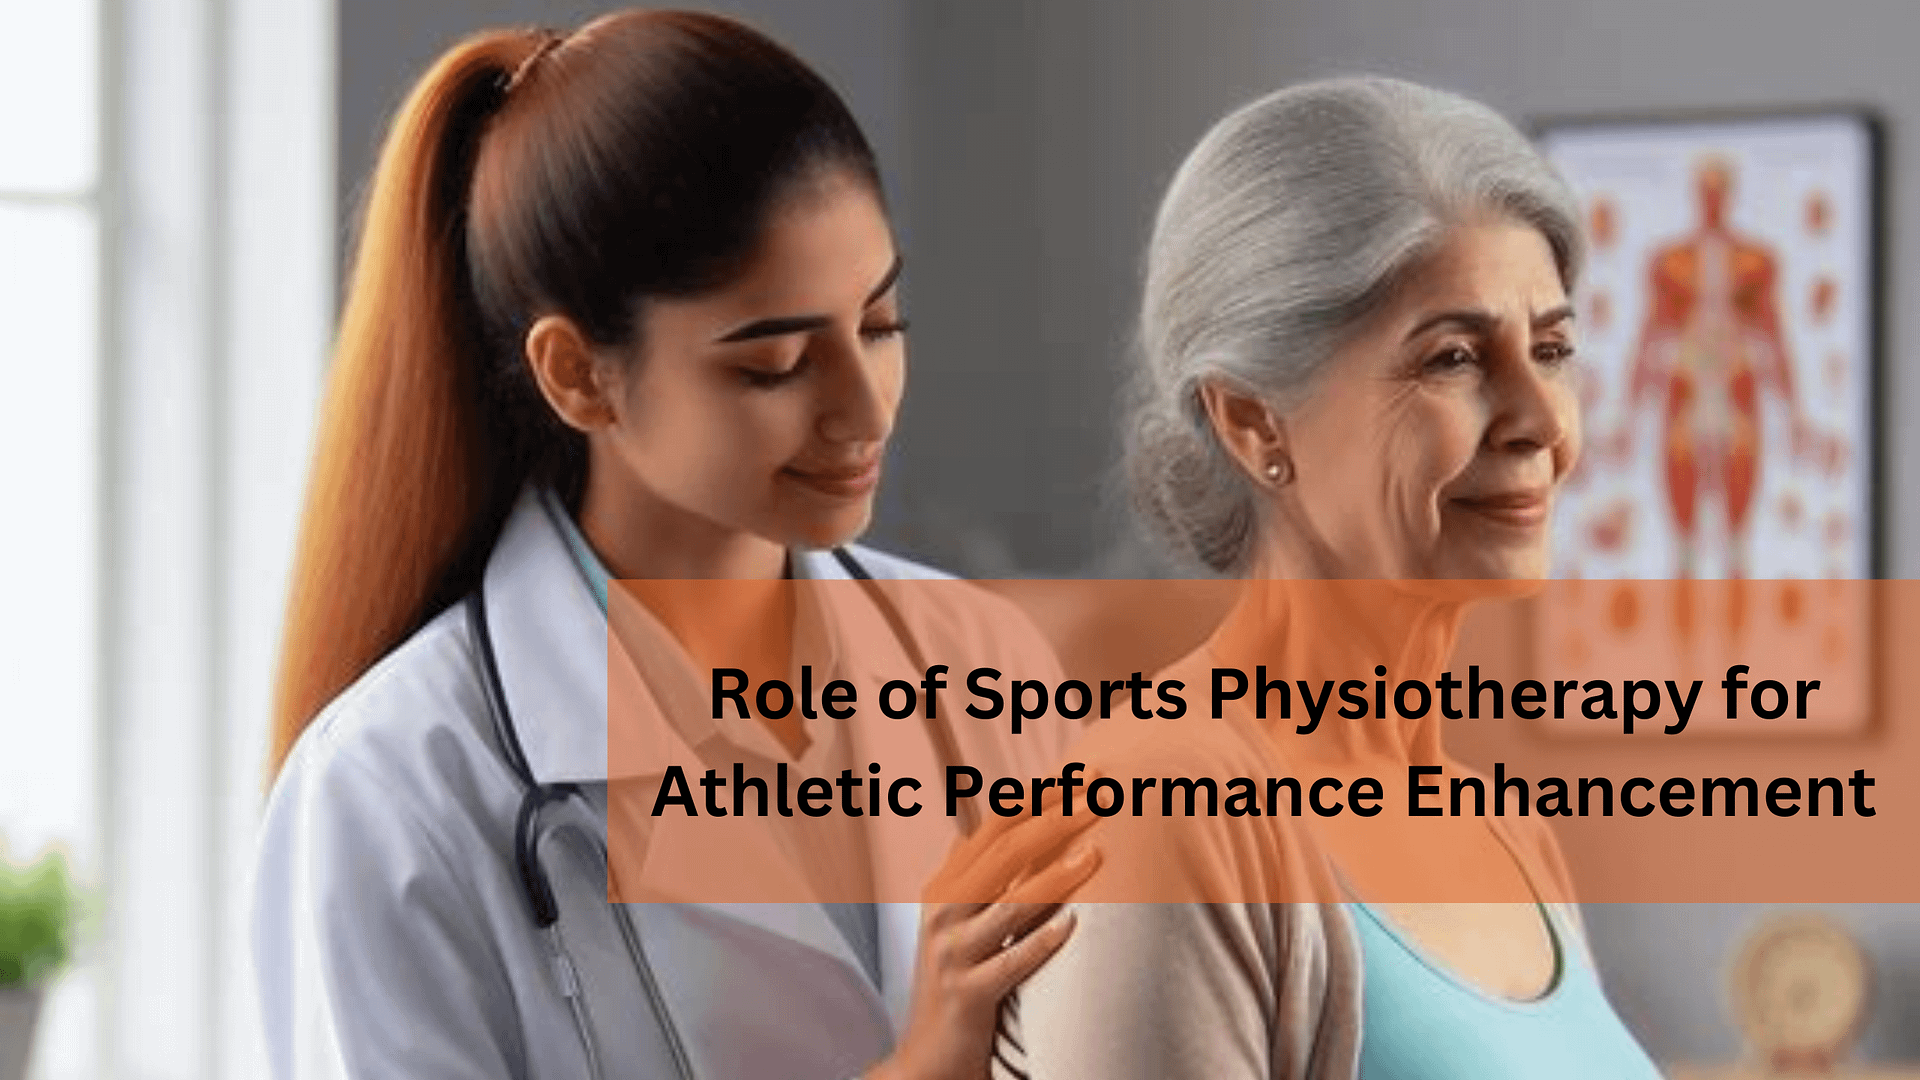 sports physiotherapy enhances athletic performance